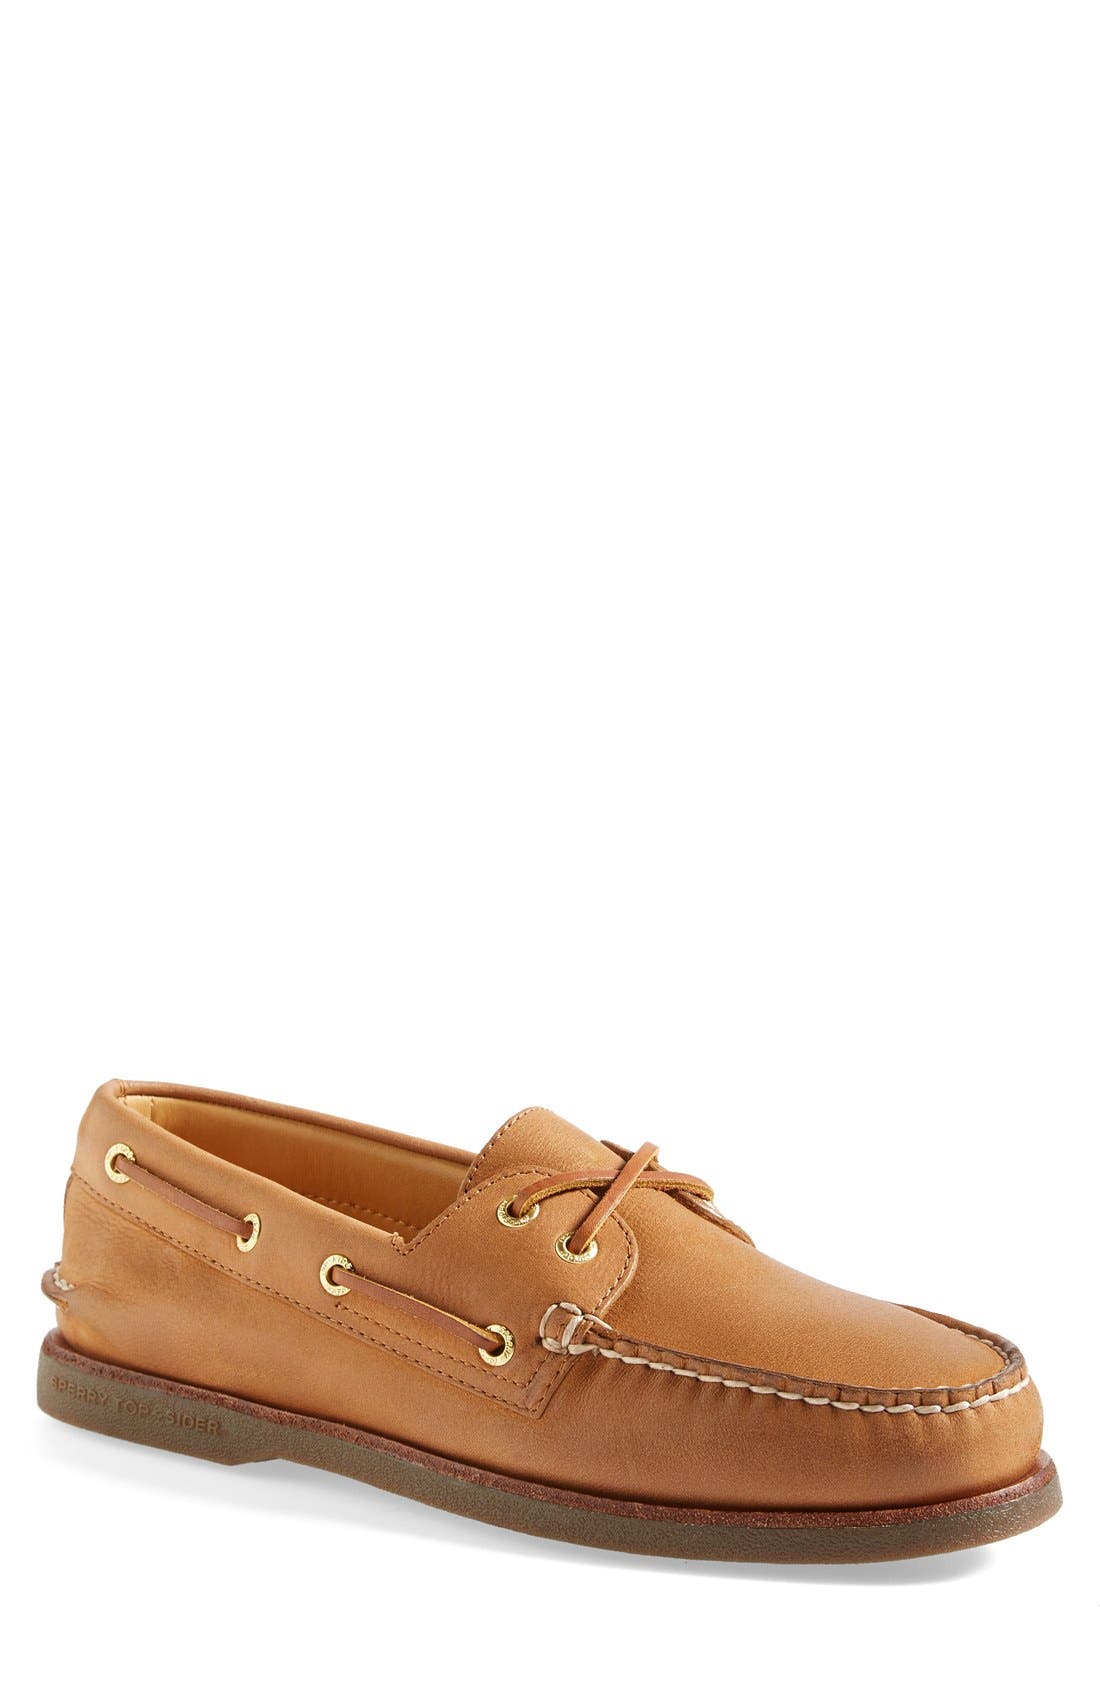 are sperry duck boots true to size